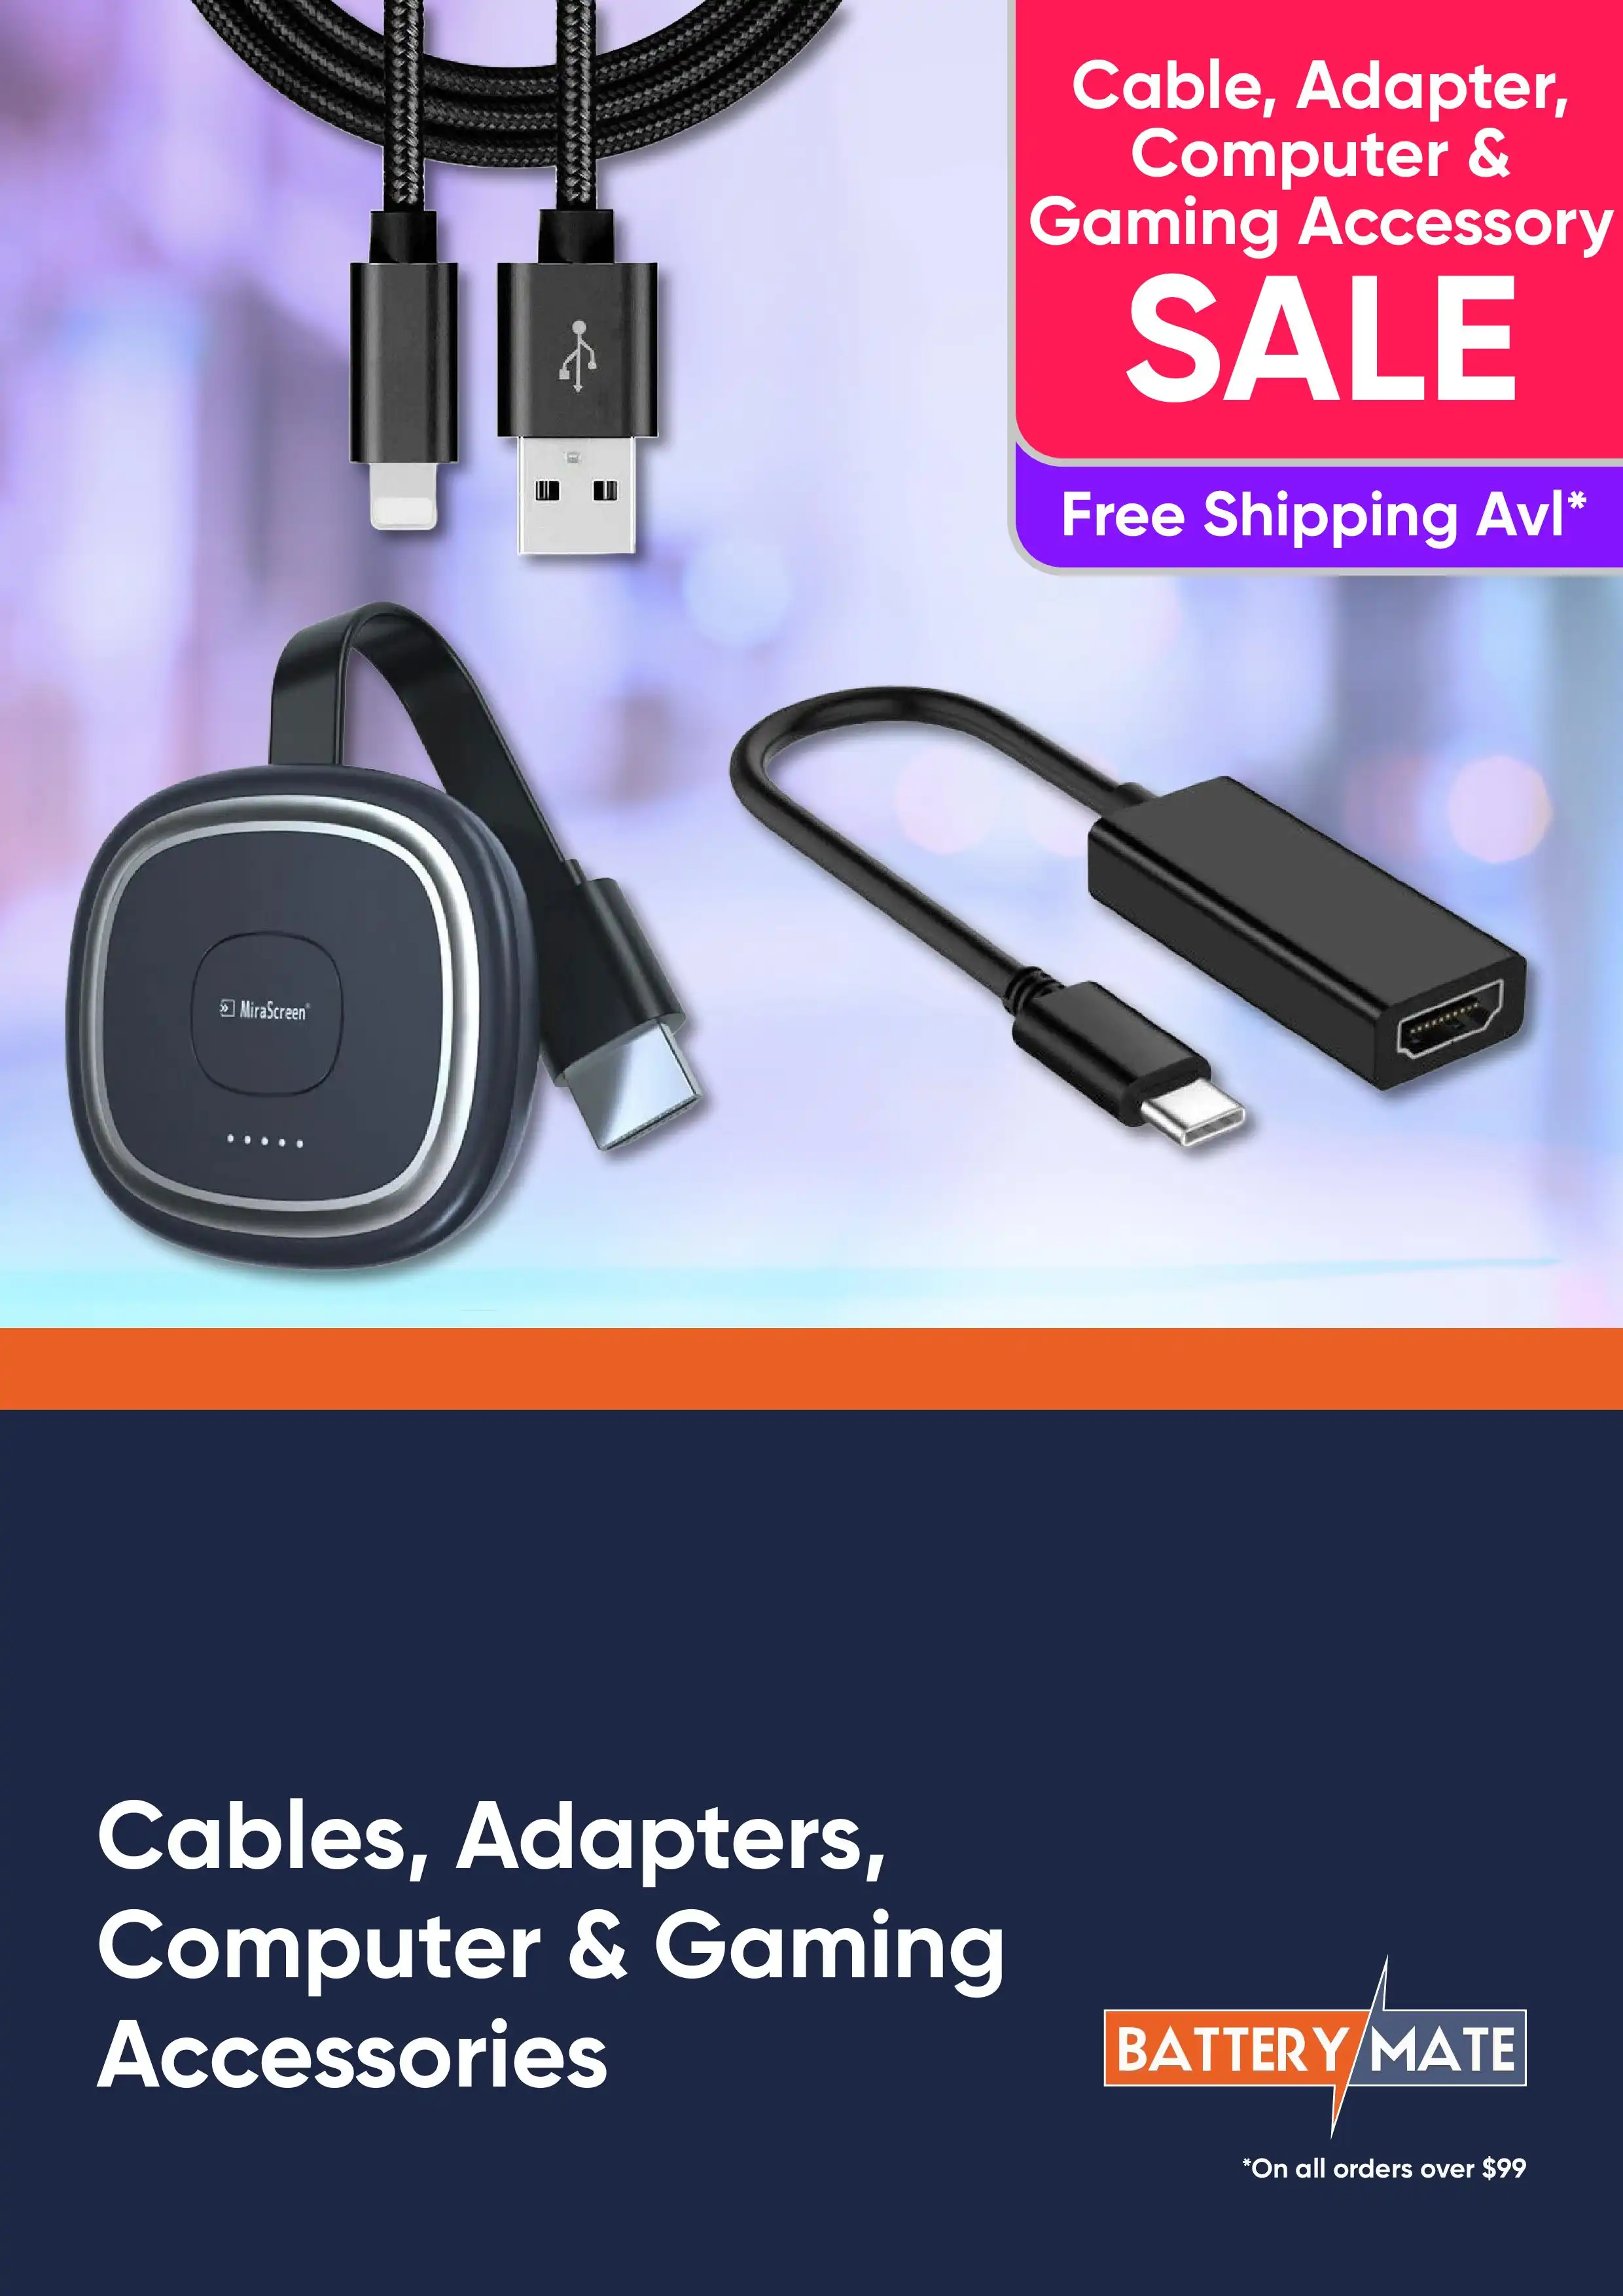 Cables, Adapters, Computer and Gaming Accessories